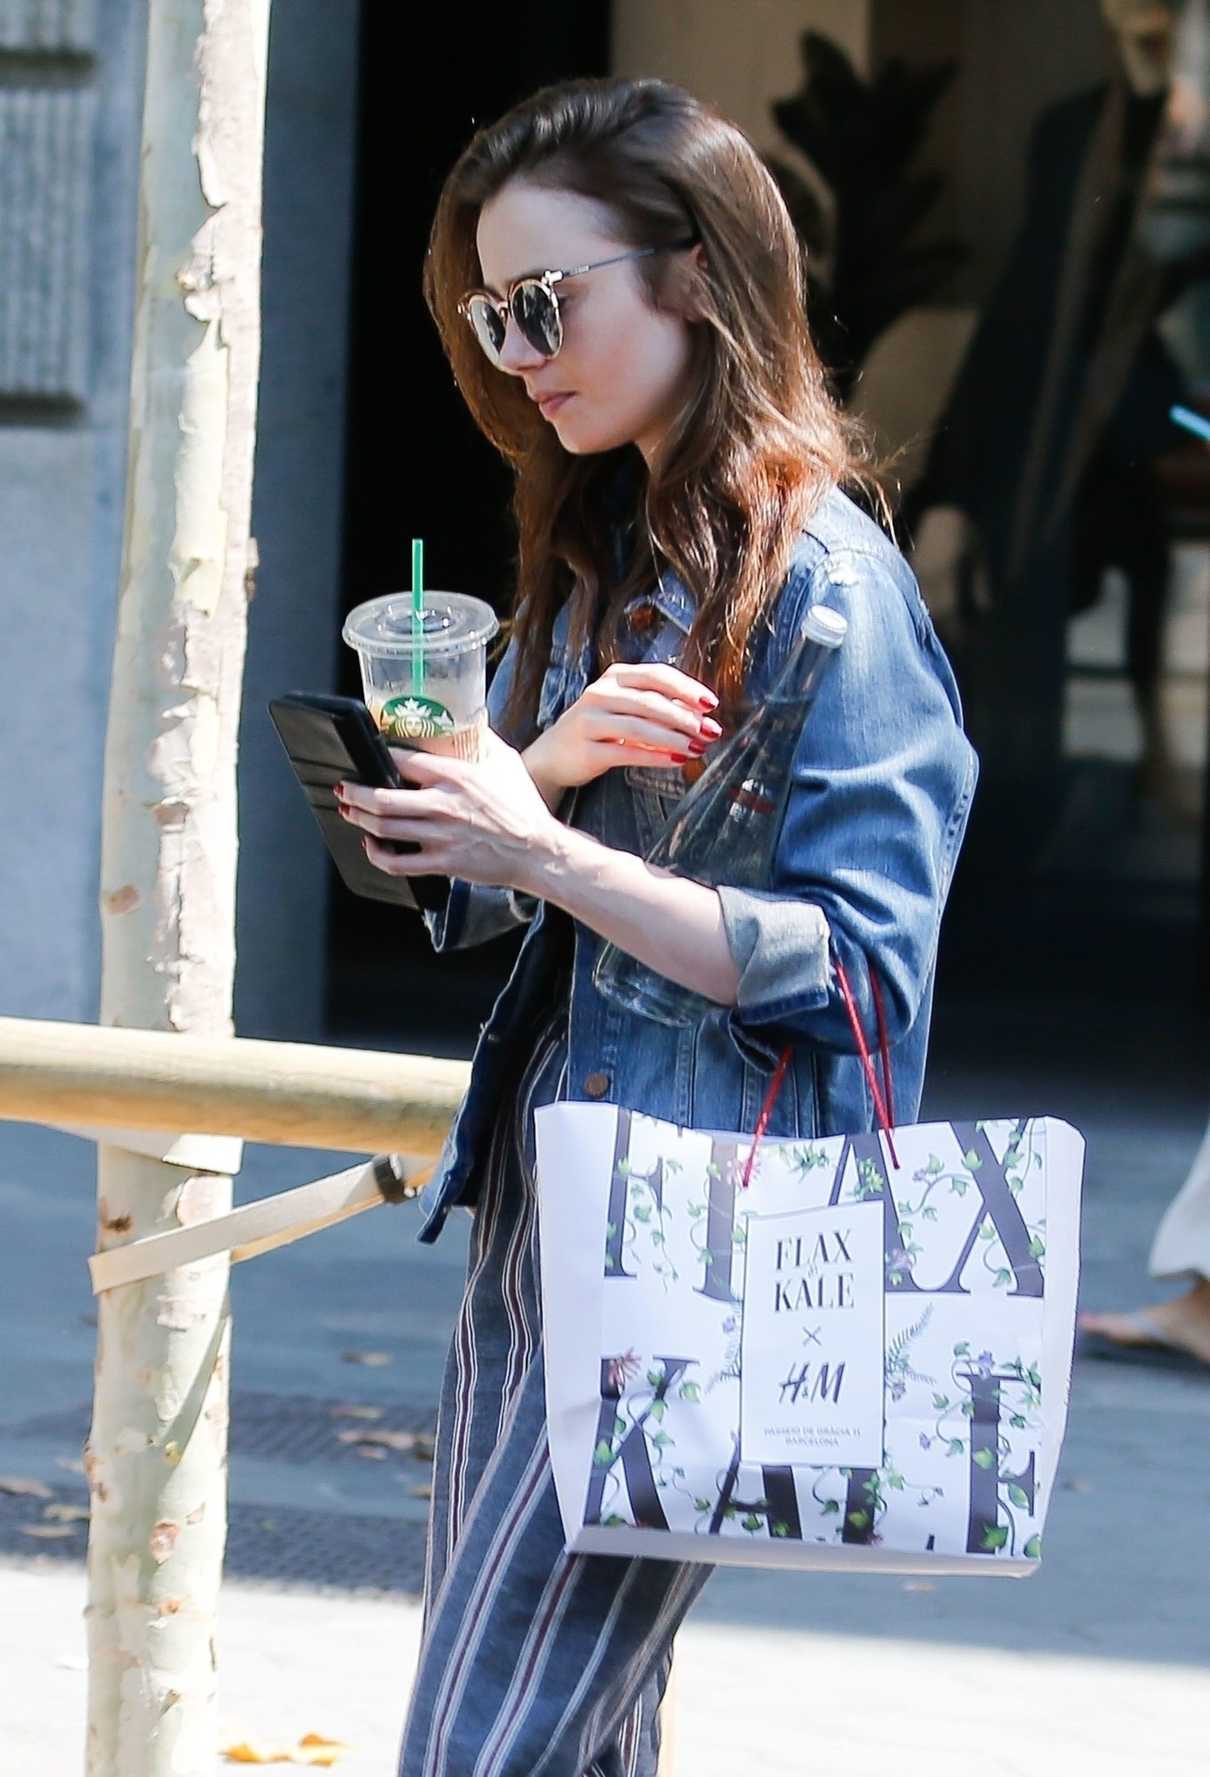 The 29-year-old actress Lily Collins was spotted out in Barcelona.-4